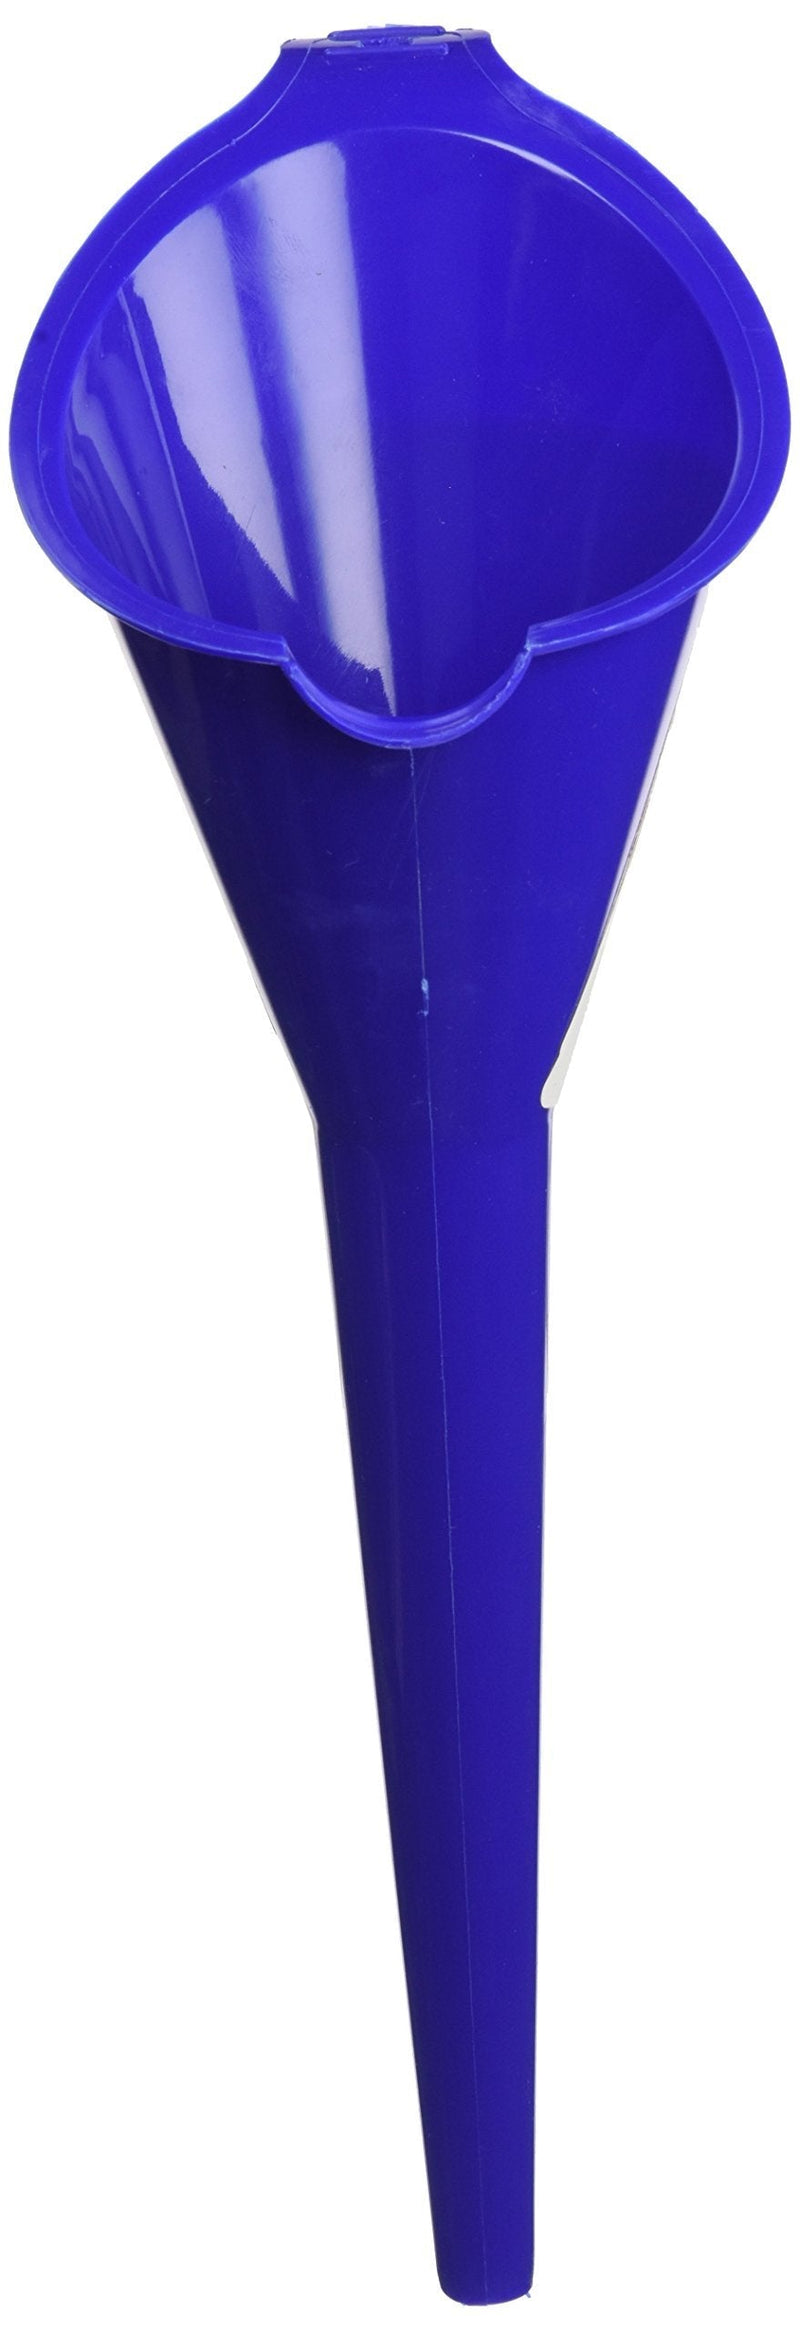  [AUSTRALIA] - Majic Multi-Purpose Long Neck Funnel for Car Oil, Gas Additives, Lubricants and Fluids, Blue